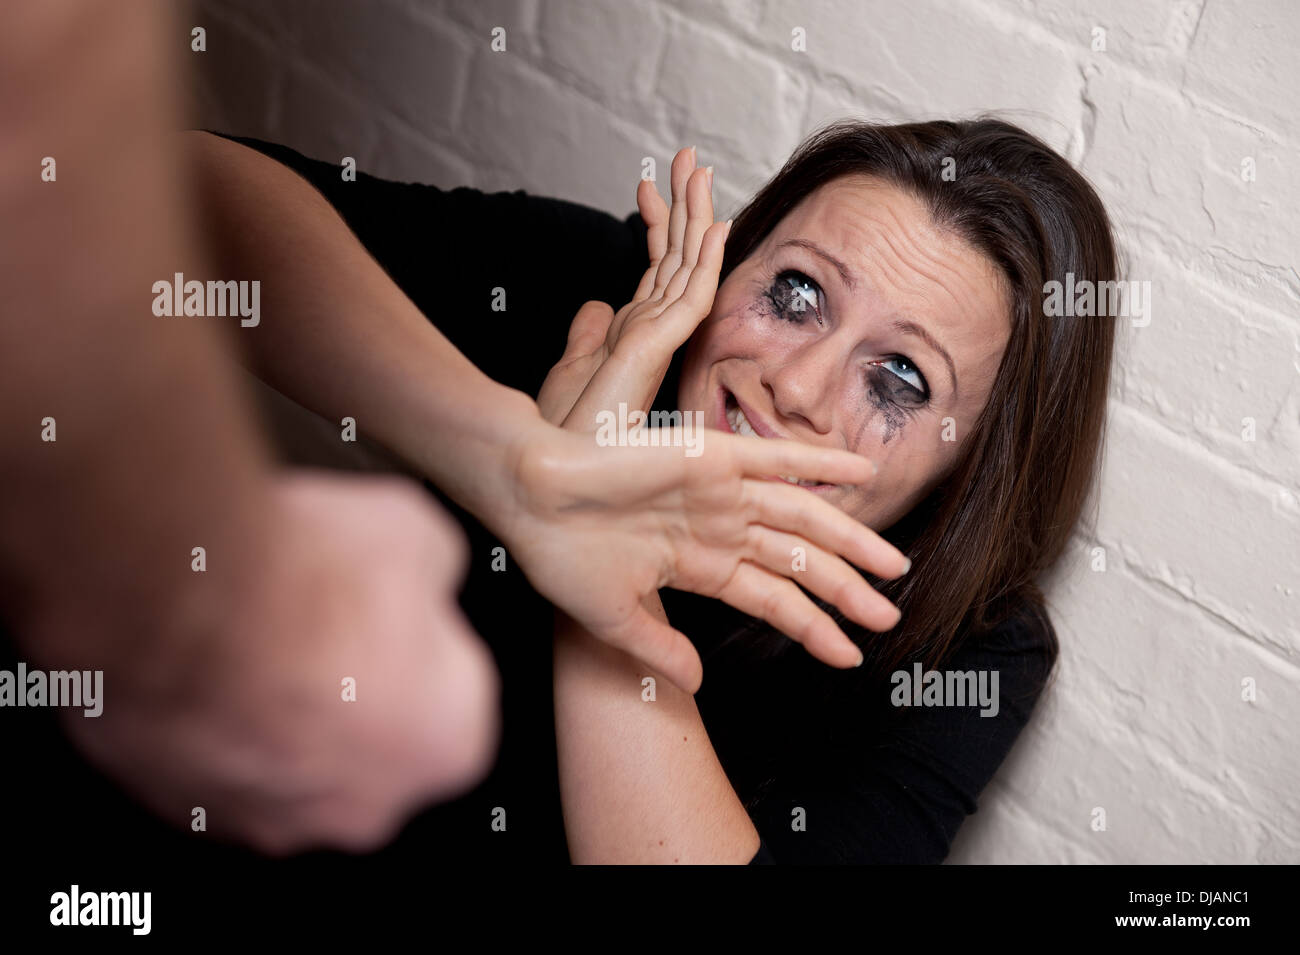 Domestic Violence -Young woman against a white wall trying to protect herself from a man's clenched fist. Stock Photo